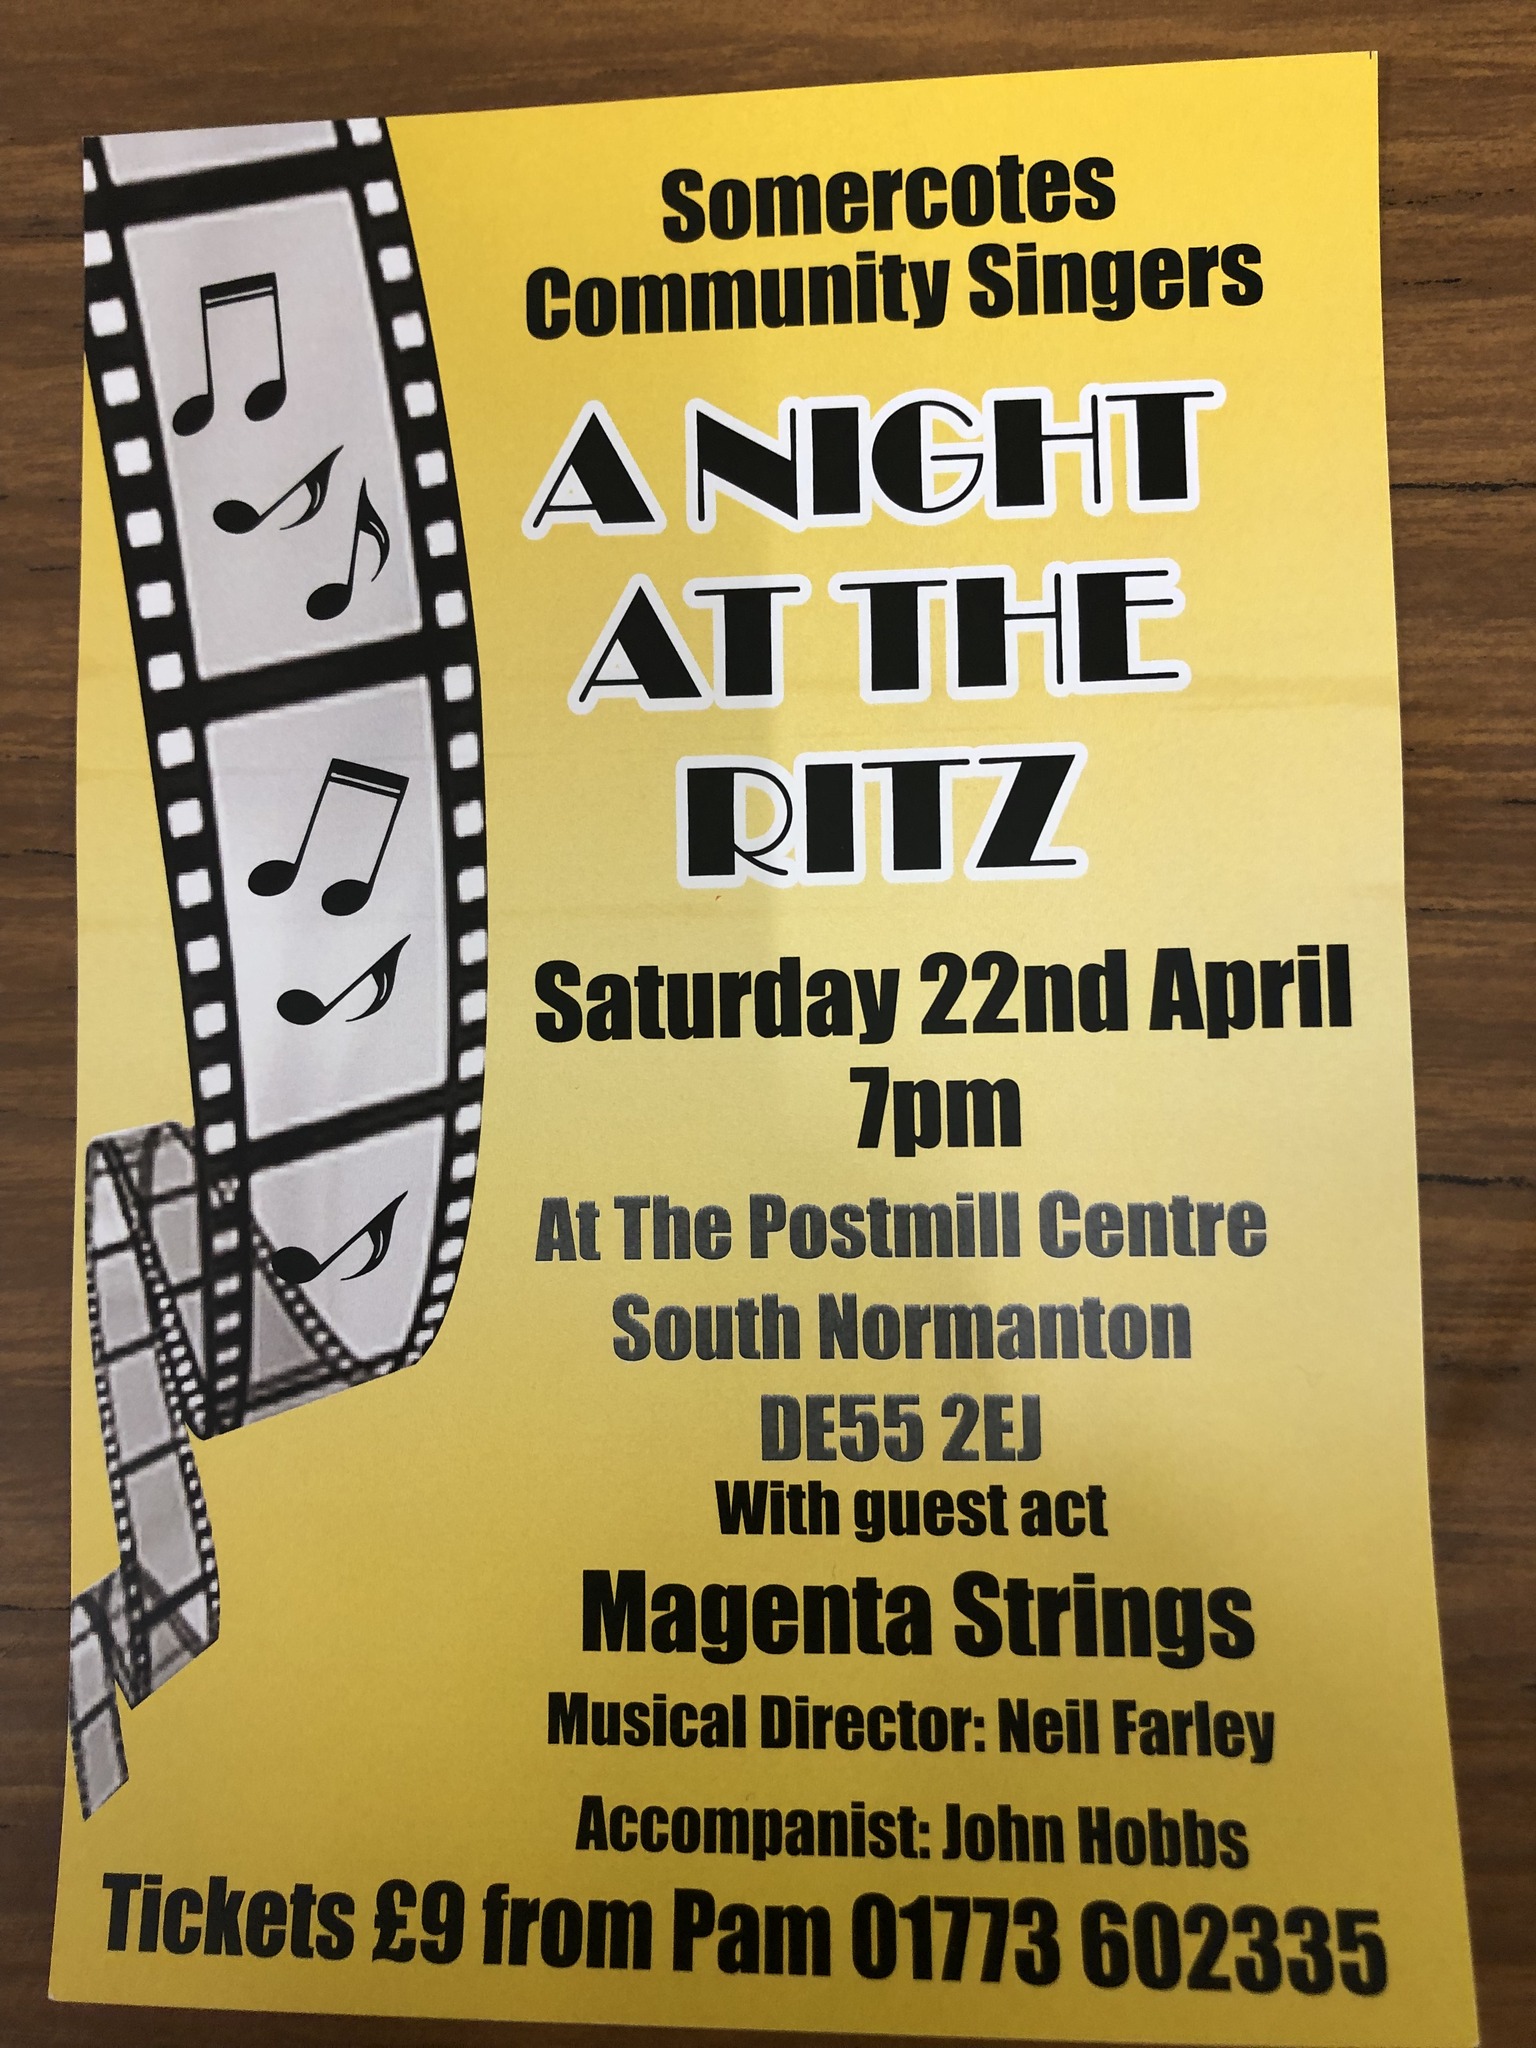 A Night at the Ritz - Somercotes Community Singers